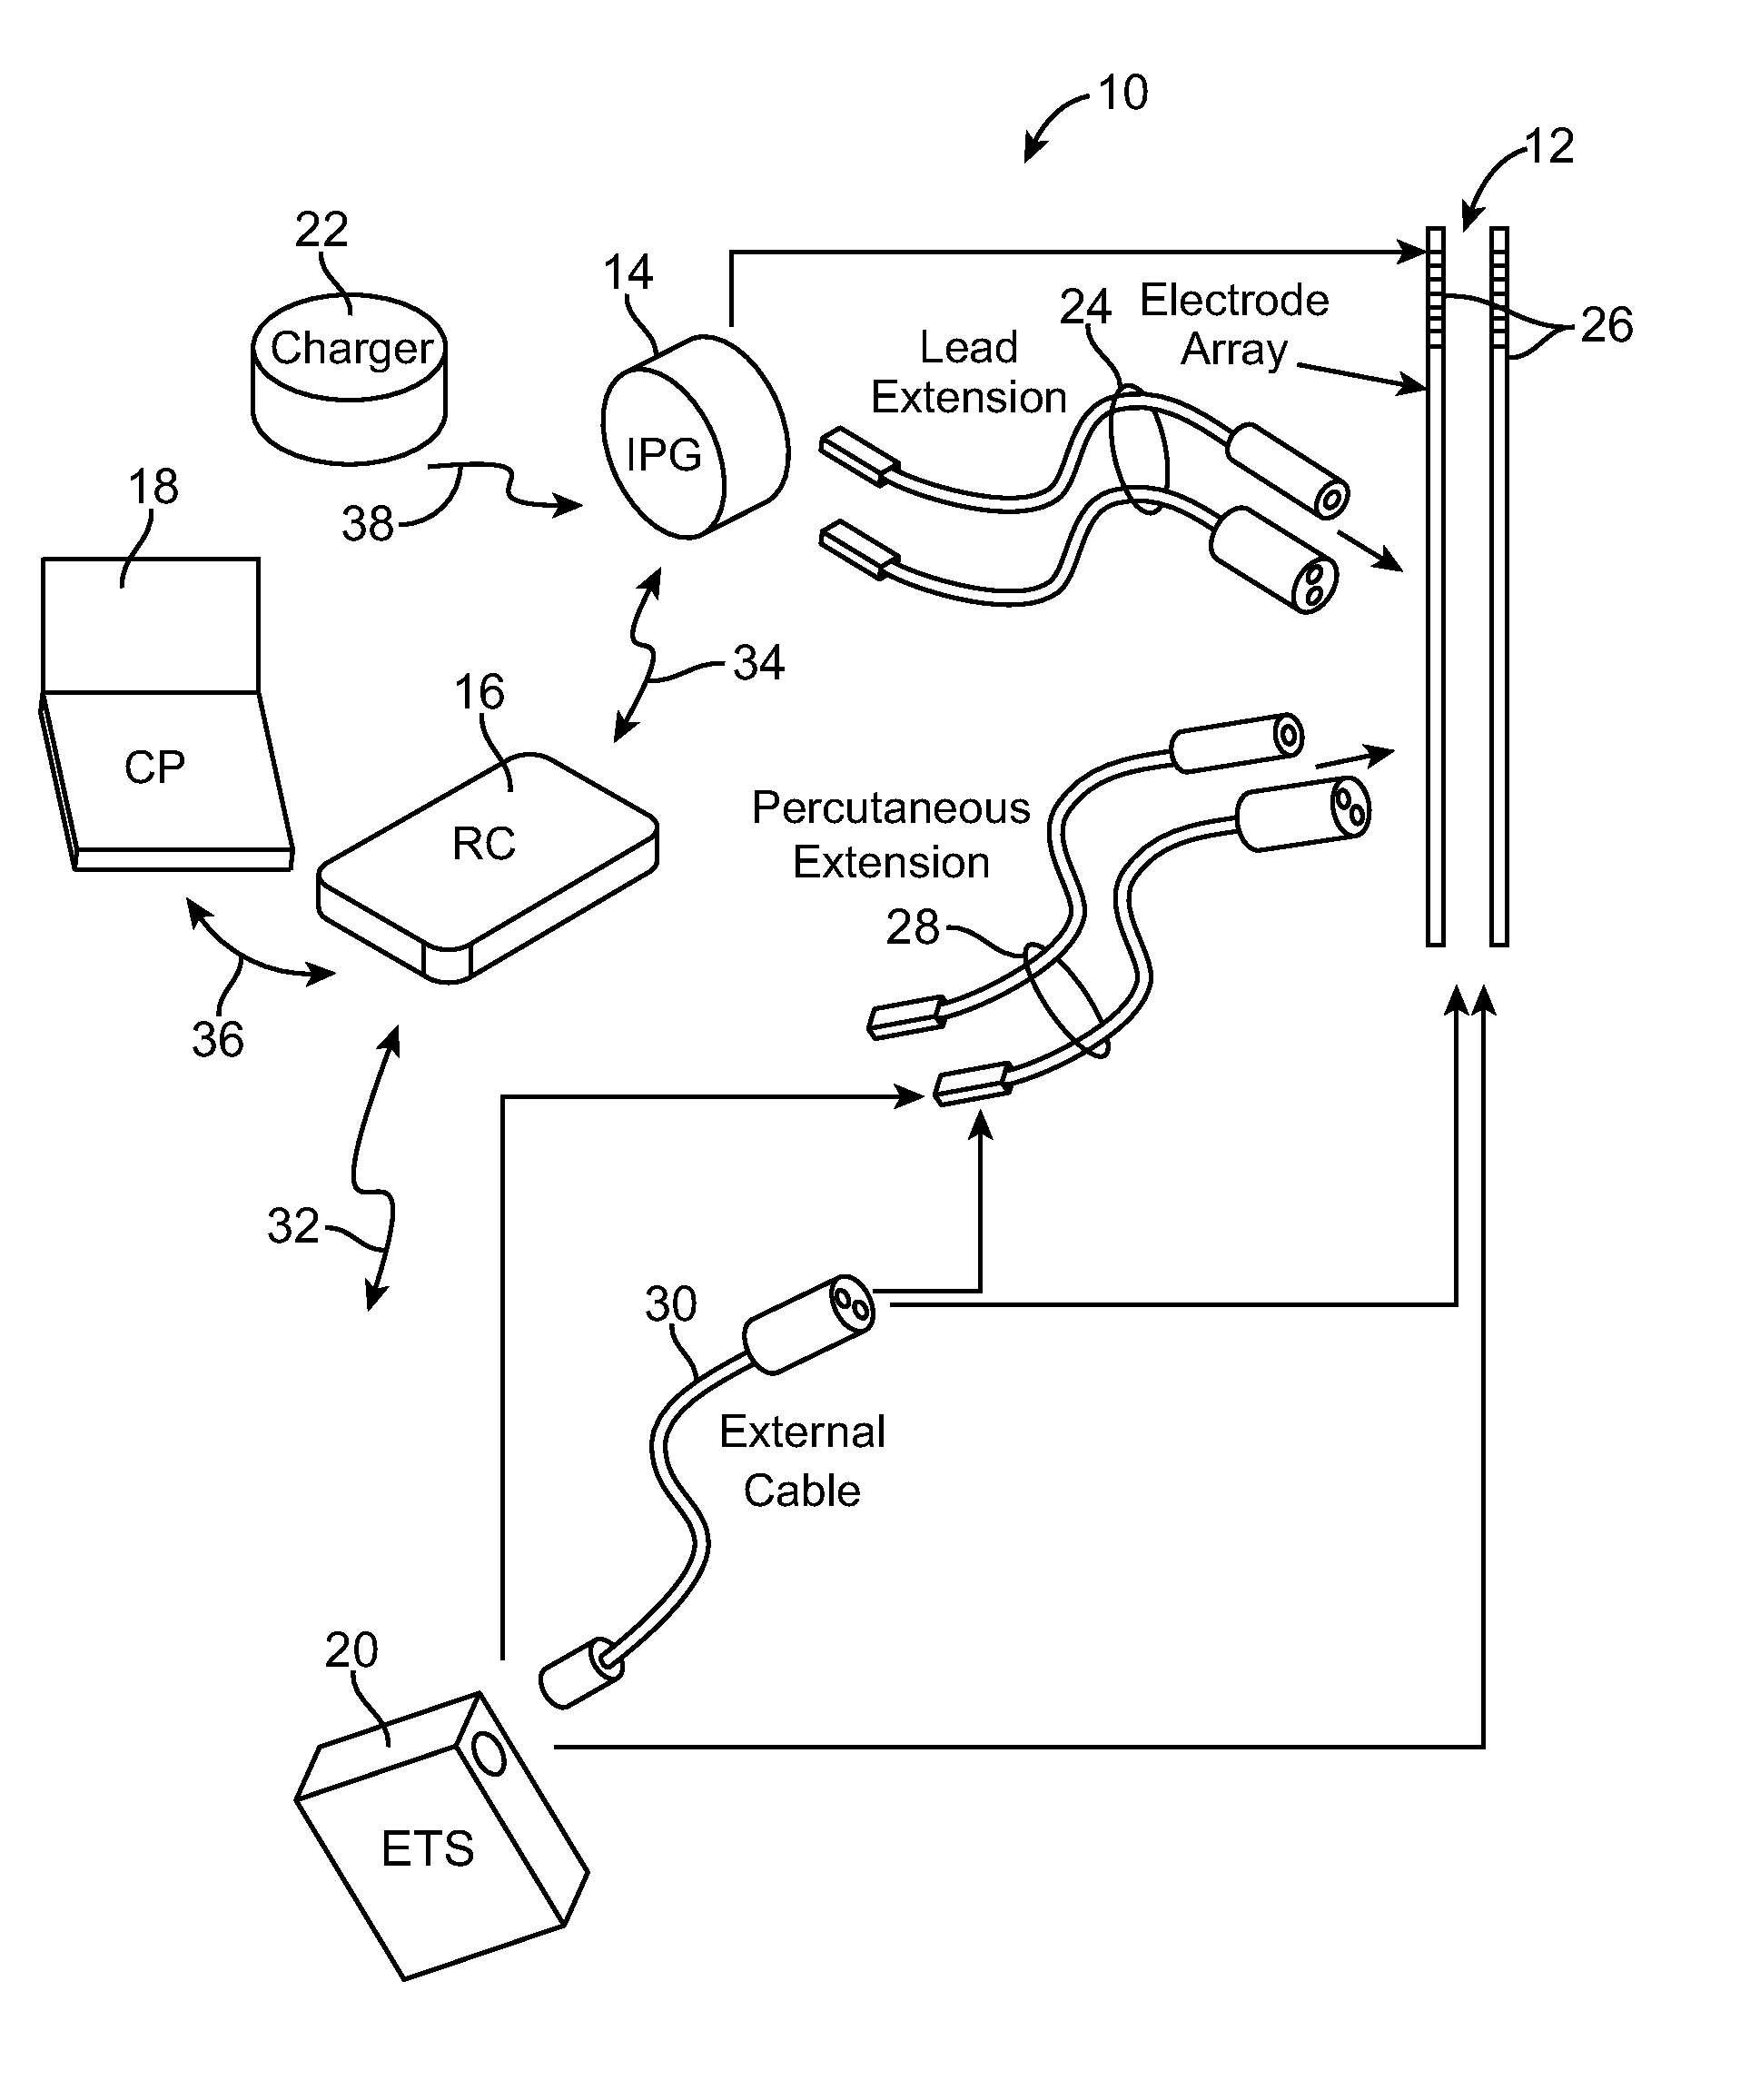 System and method for maintaining a distribution of currents in an electrode array using independent voltage sources